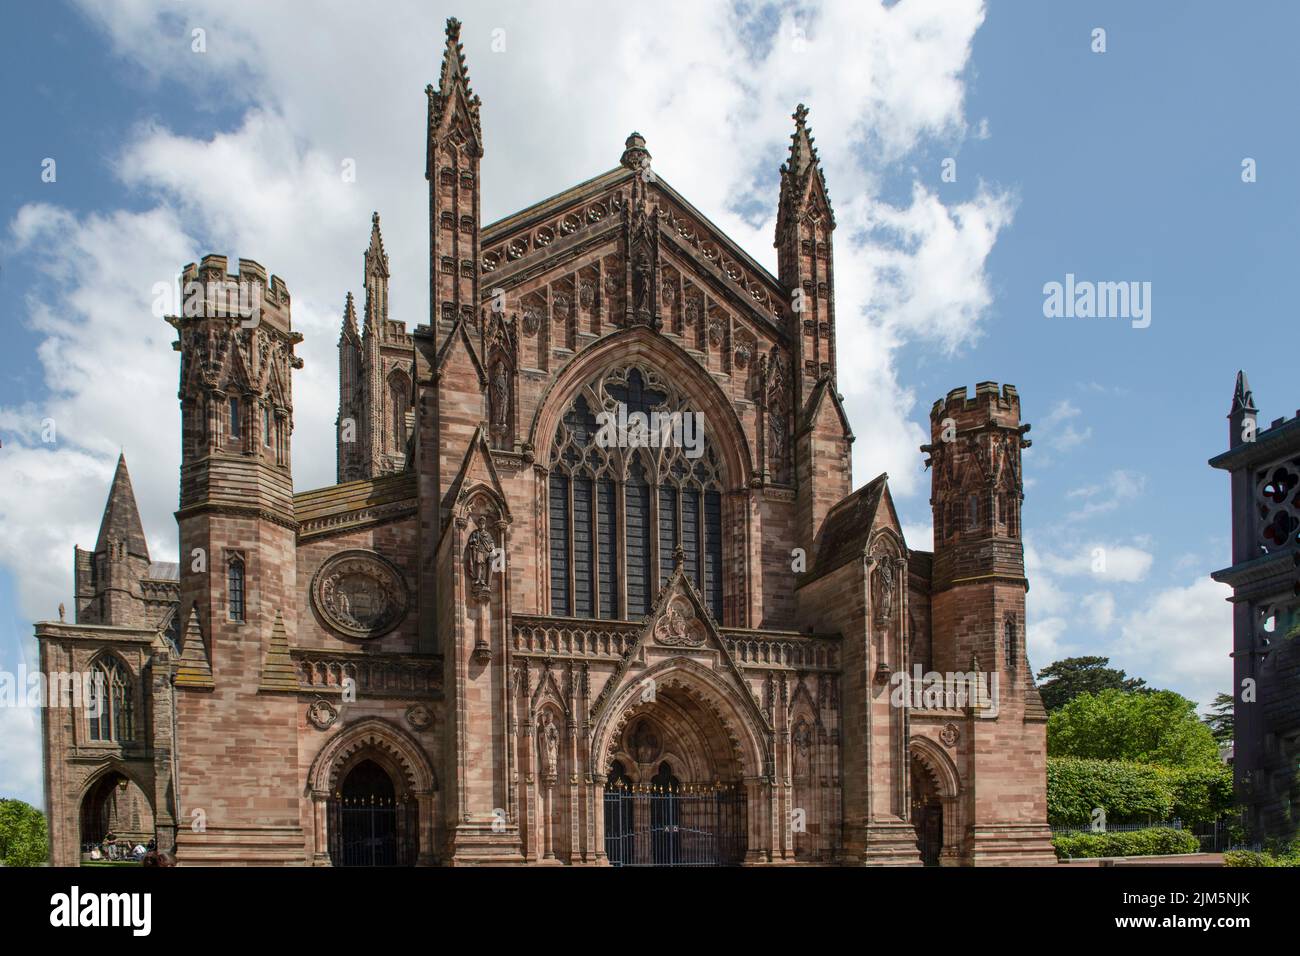 Hereford Cathedral, Hereford, Herefordshire, England Stock Photo